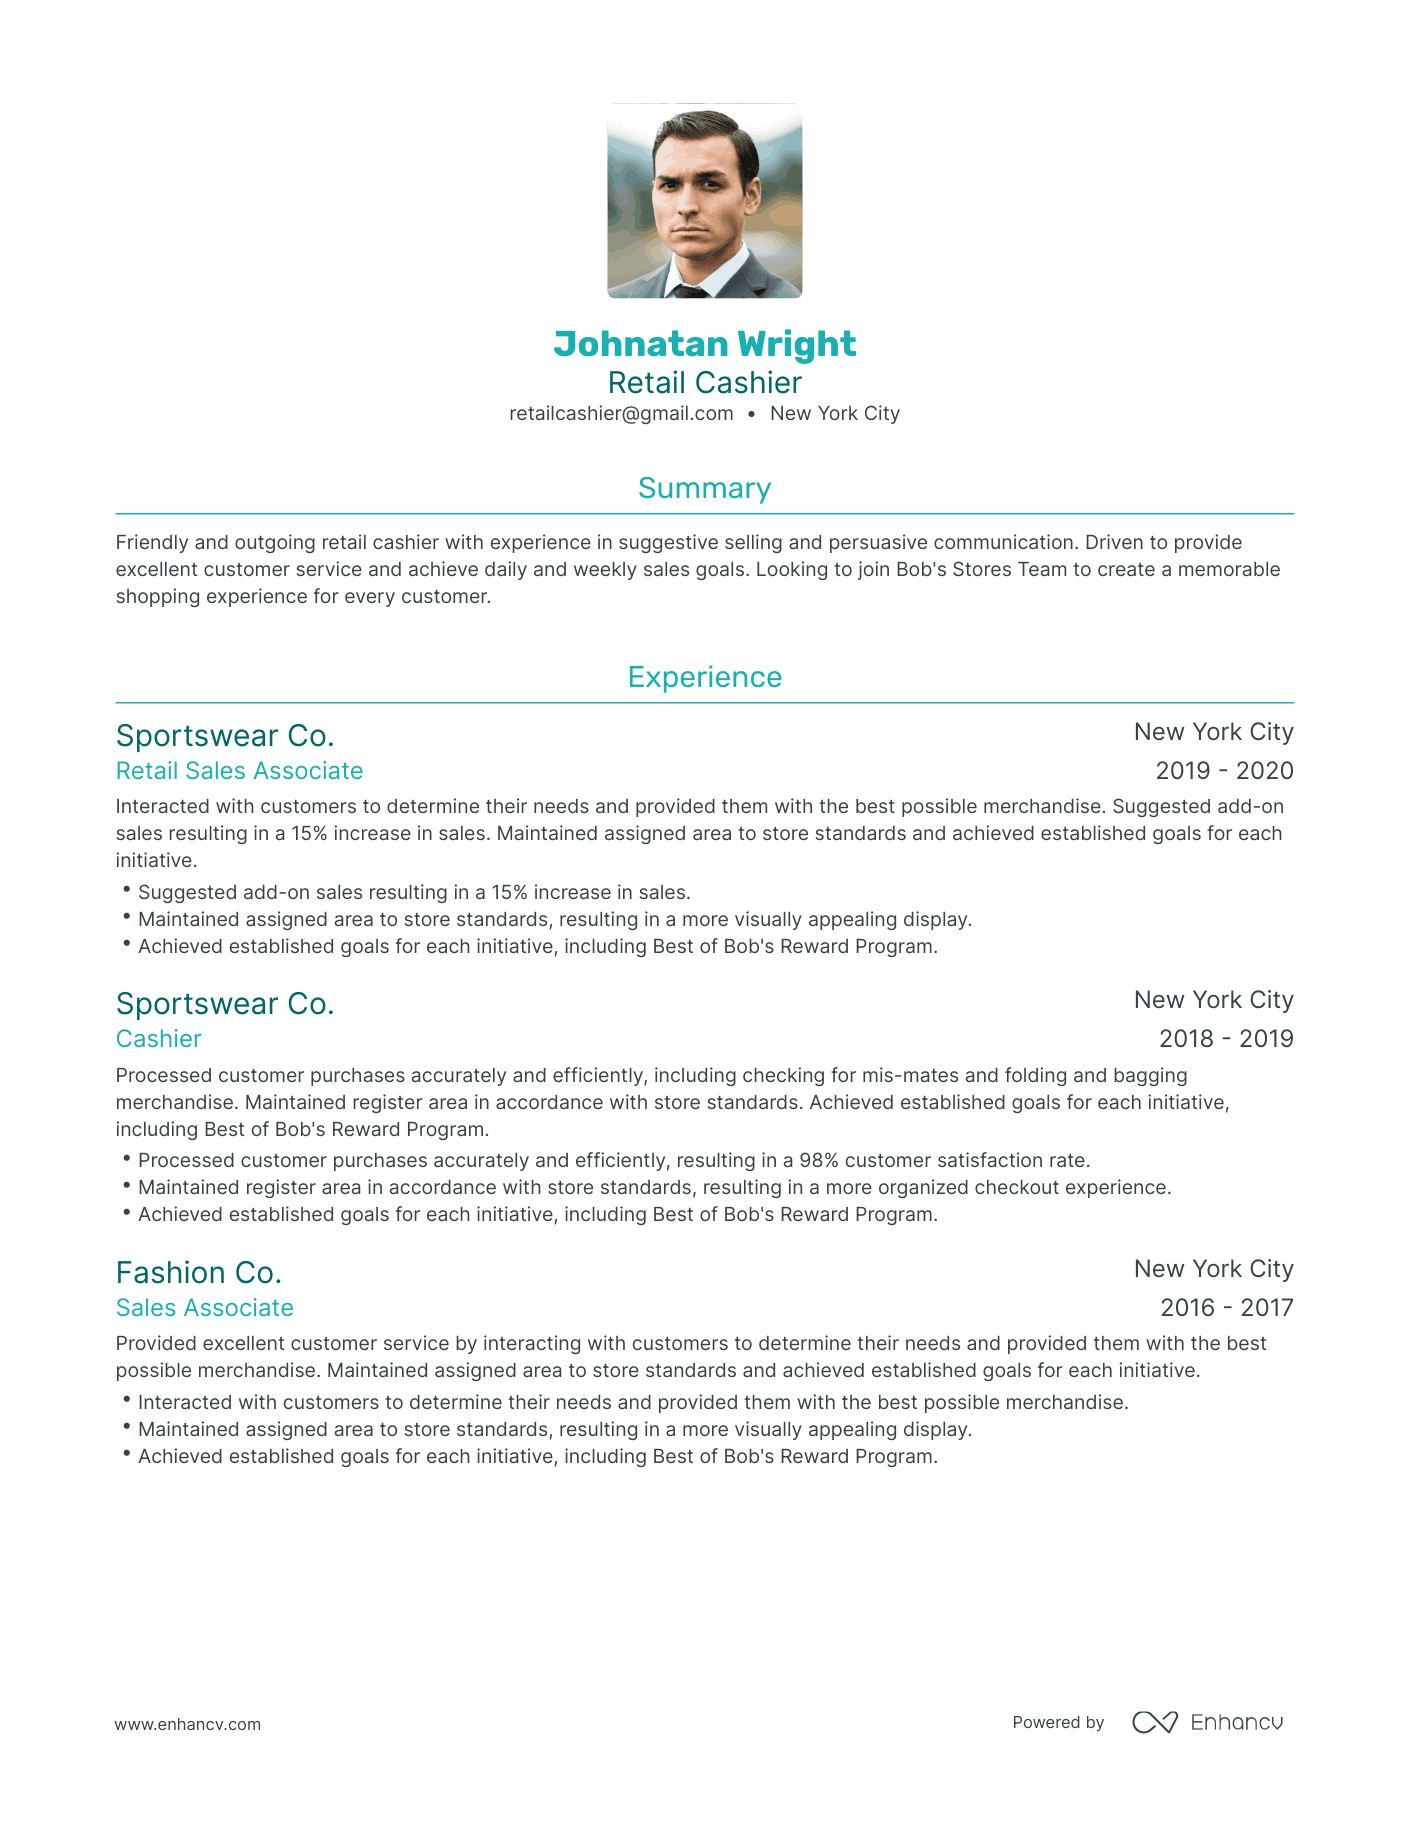 Traditional Retail Cashier Resume Template